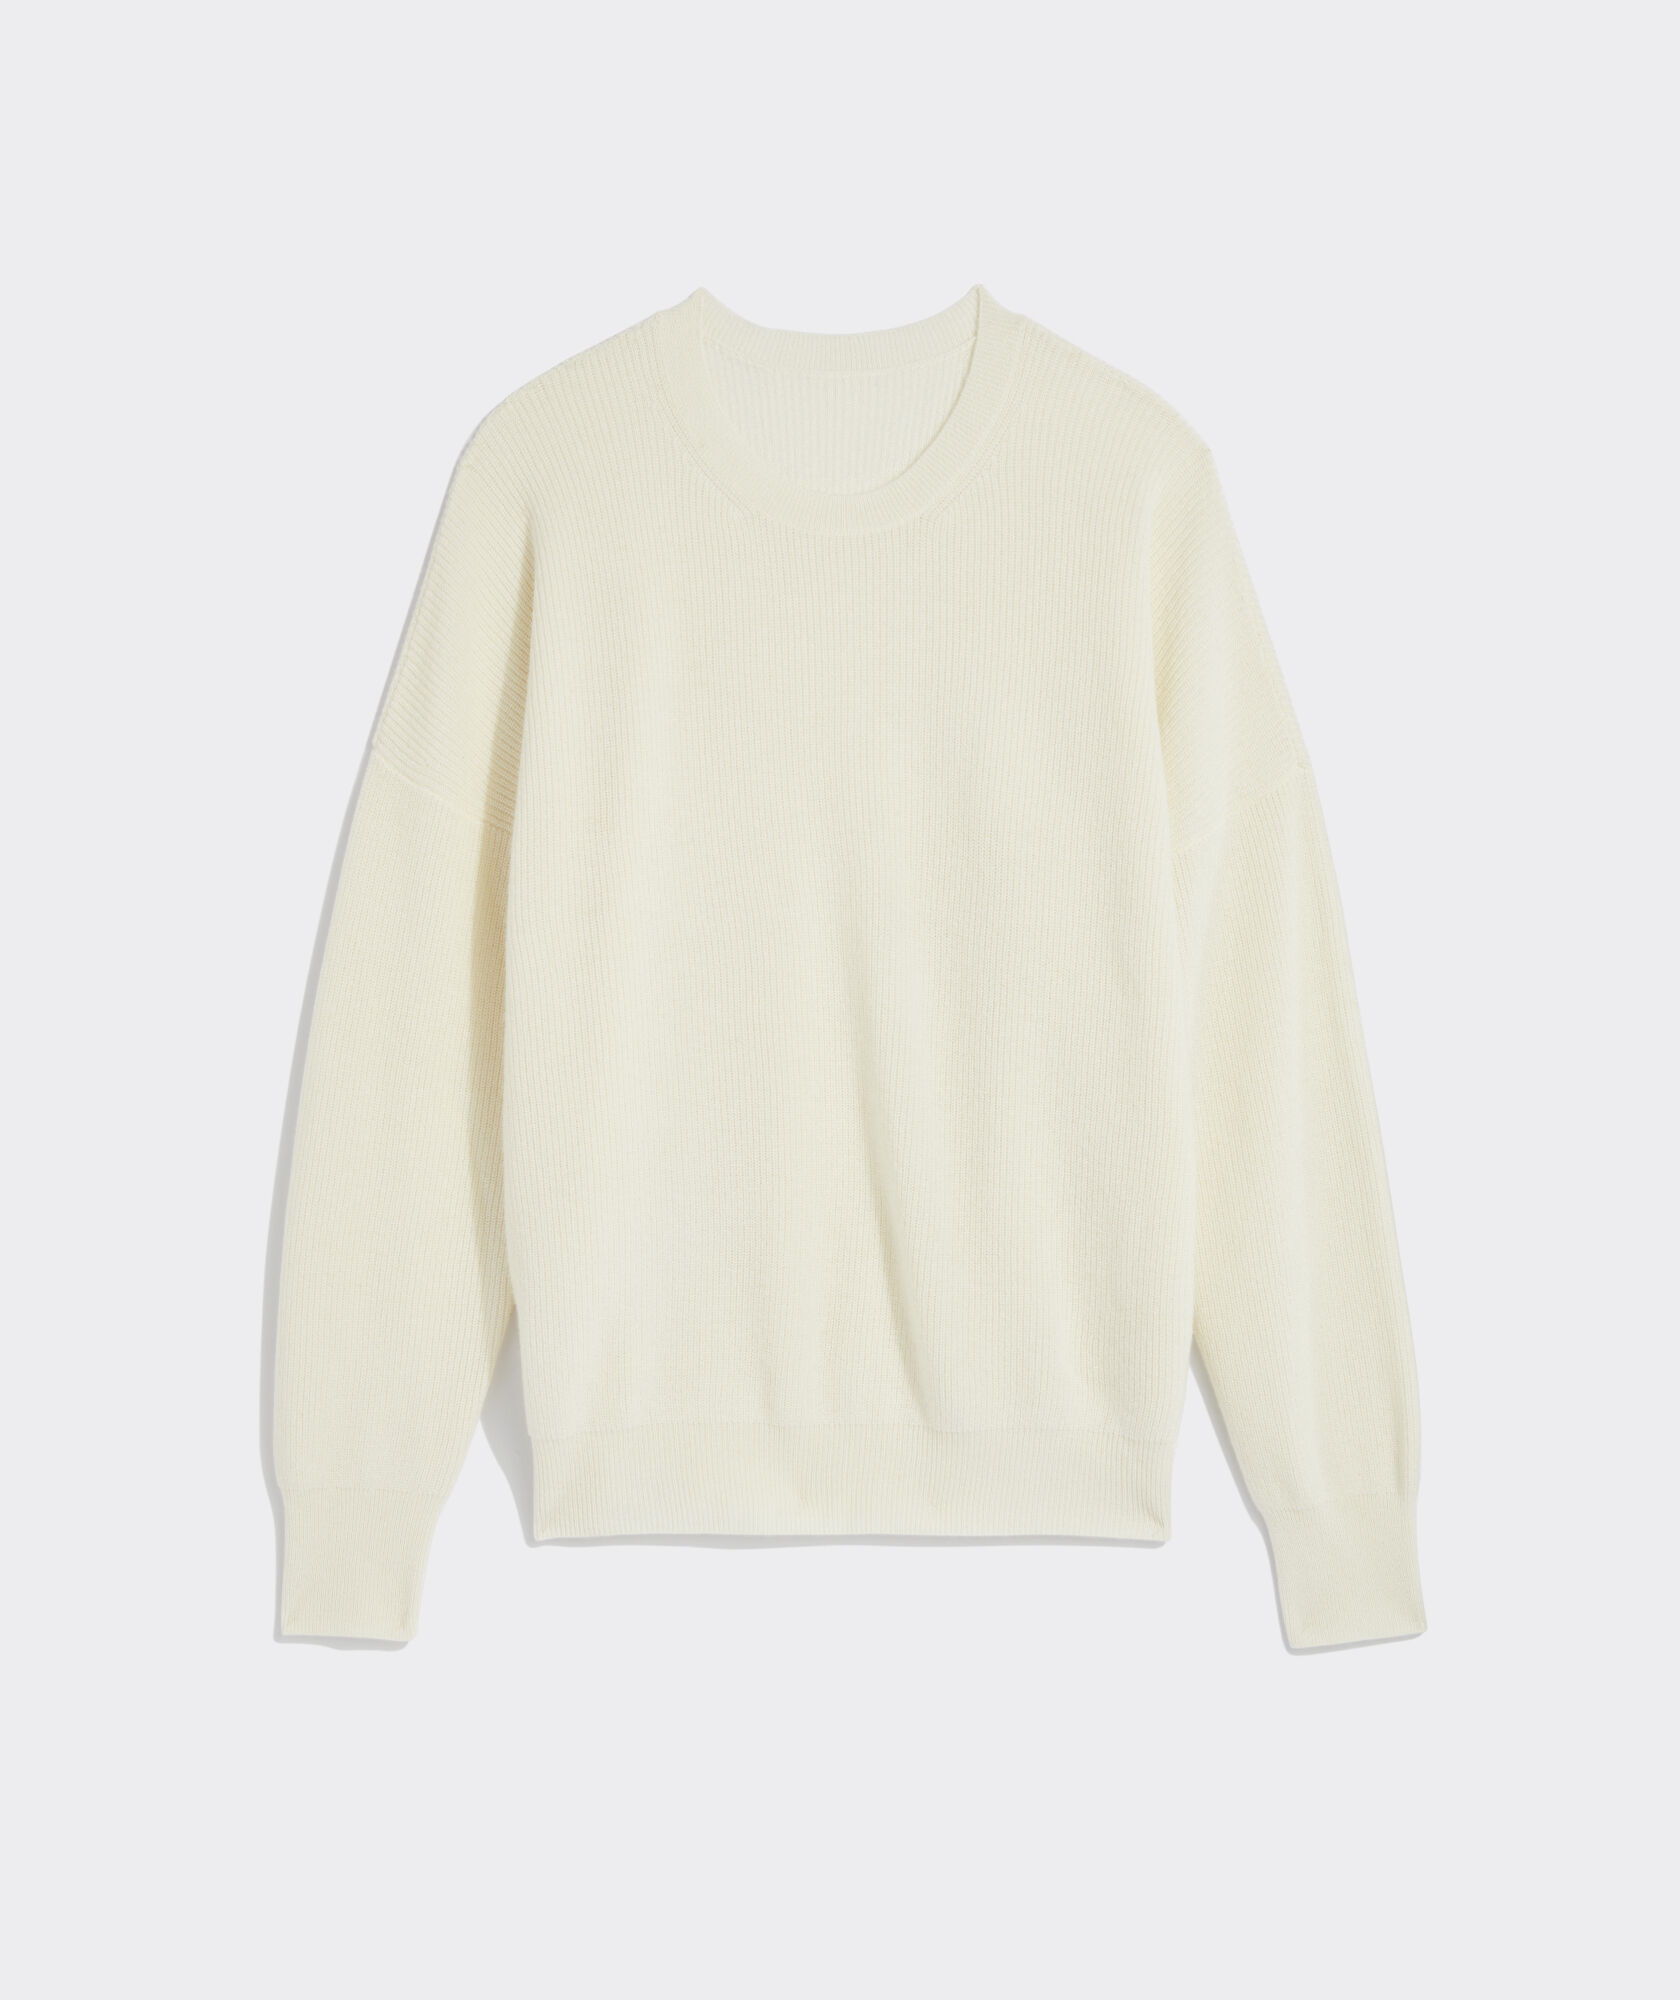 Shop Oversized Ribbed Luxe Crewneck Sweater at vineyard vines